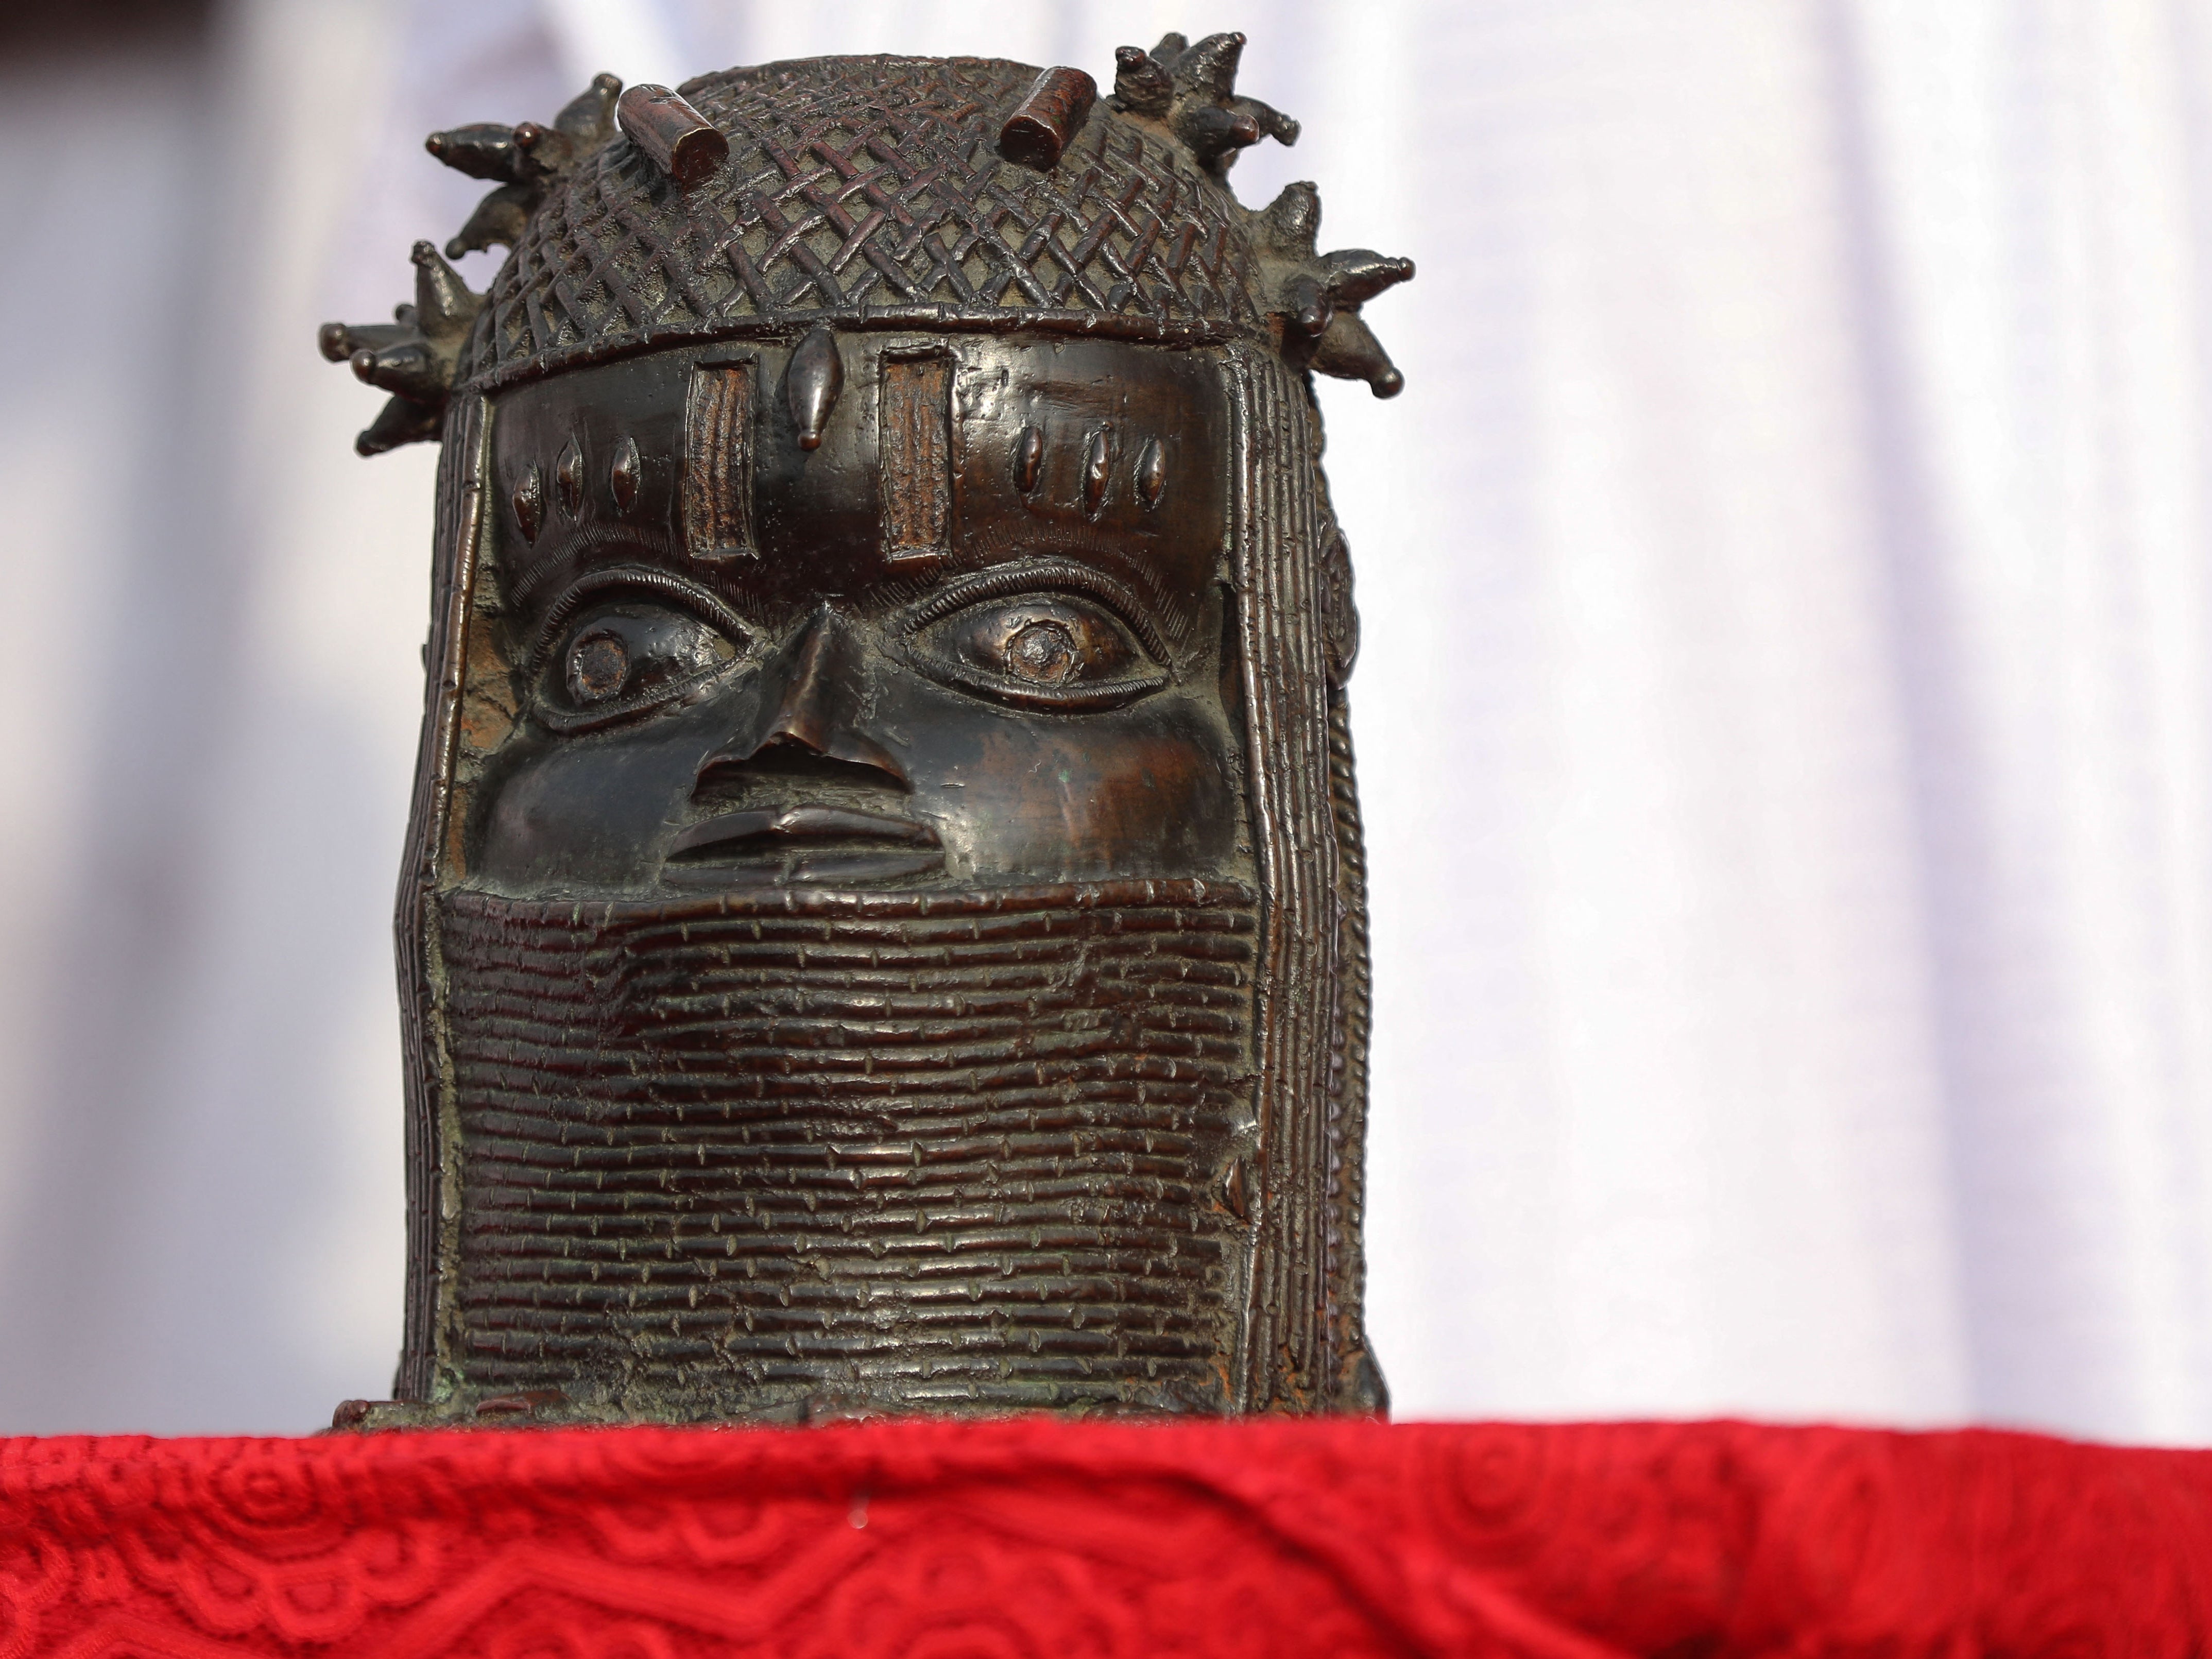 The bronze Oba head was returned to Nigerian authorities last October